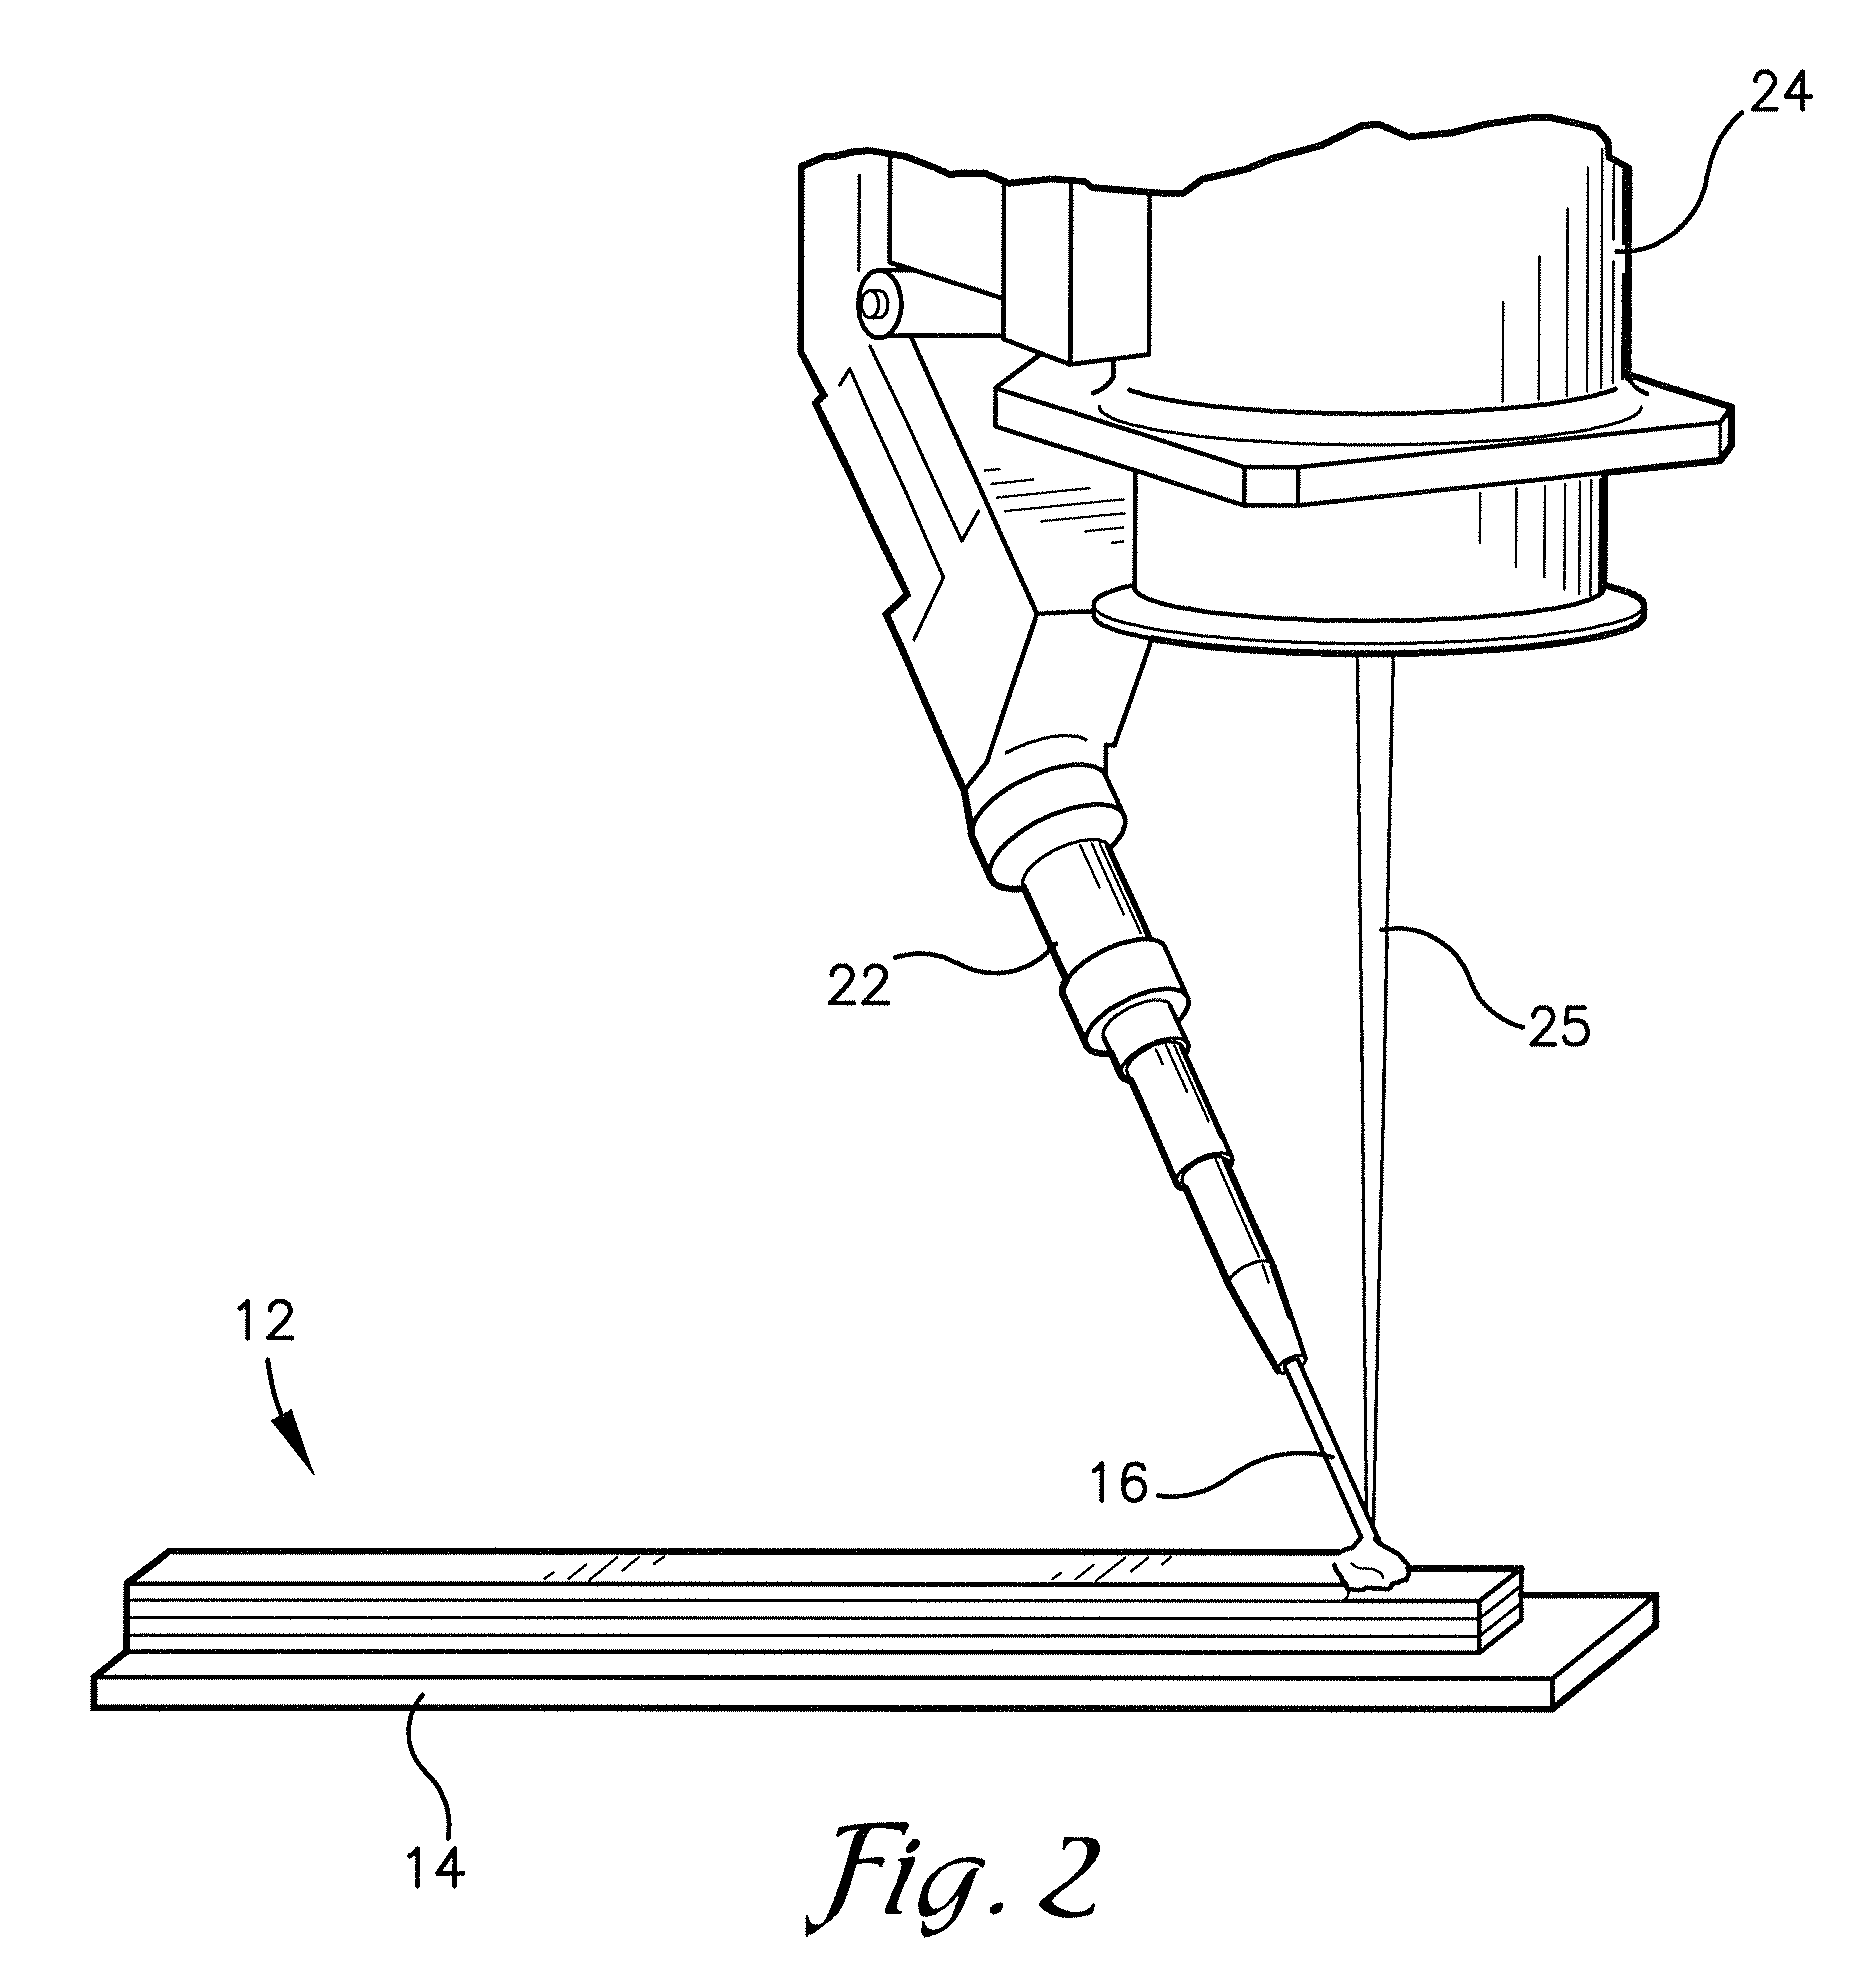 System and method to form and heat-treat a metal part